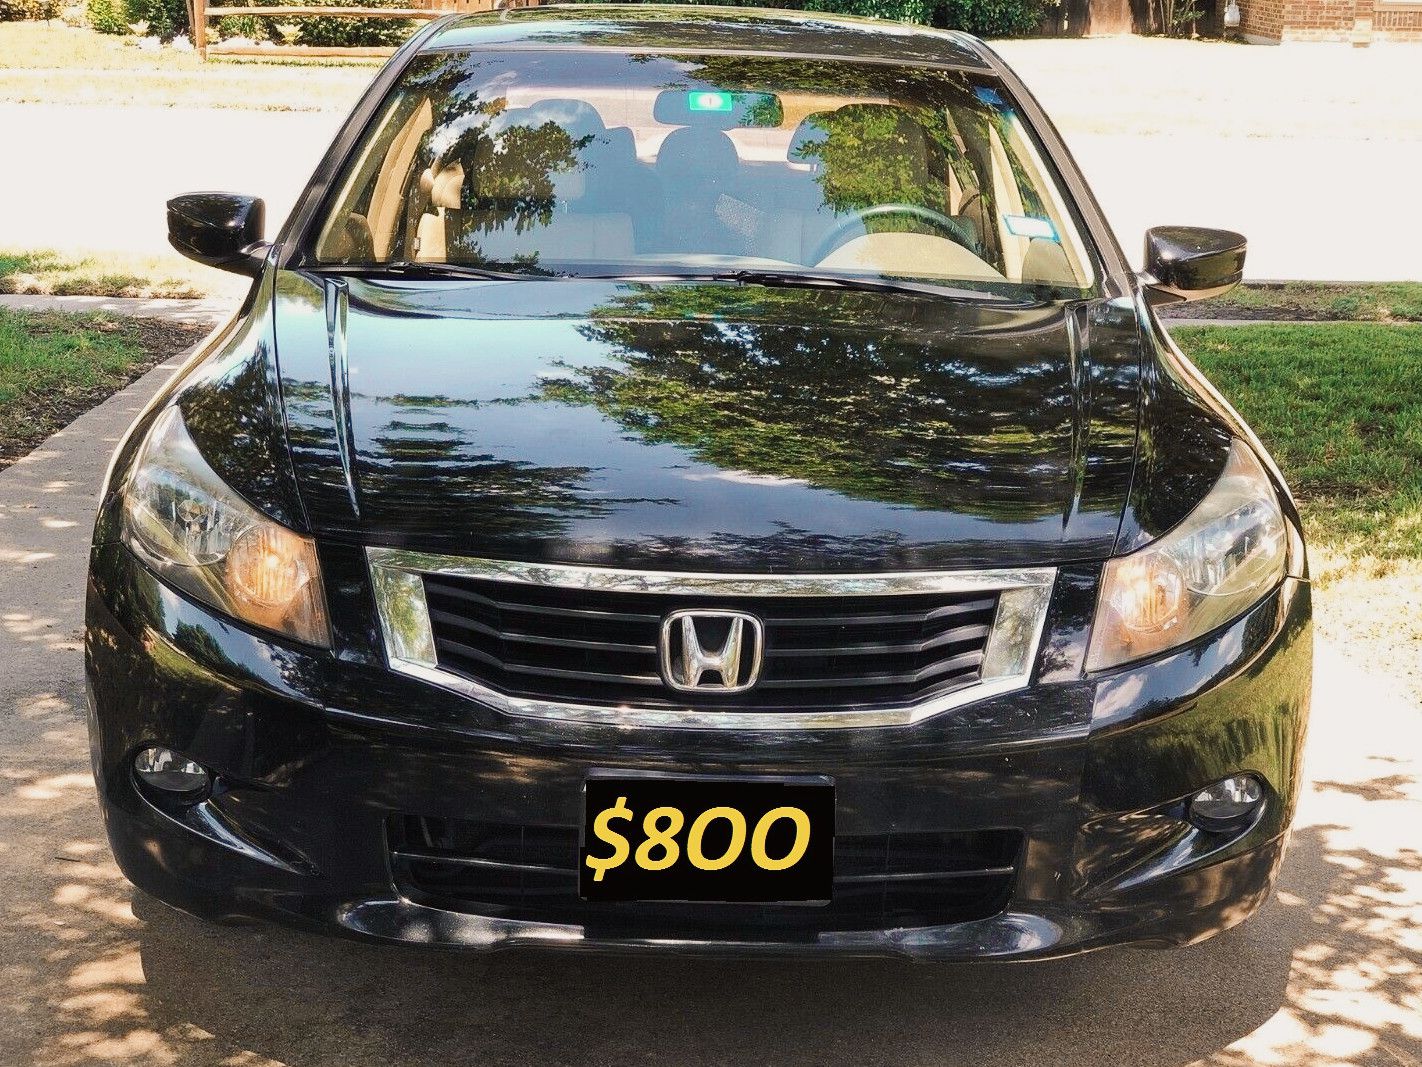 Honda Accord🍀🌿 2OO9 EX-L V6 in very good condition !!!🍀🌿